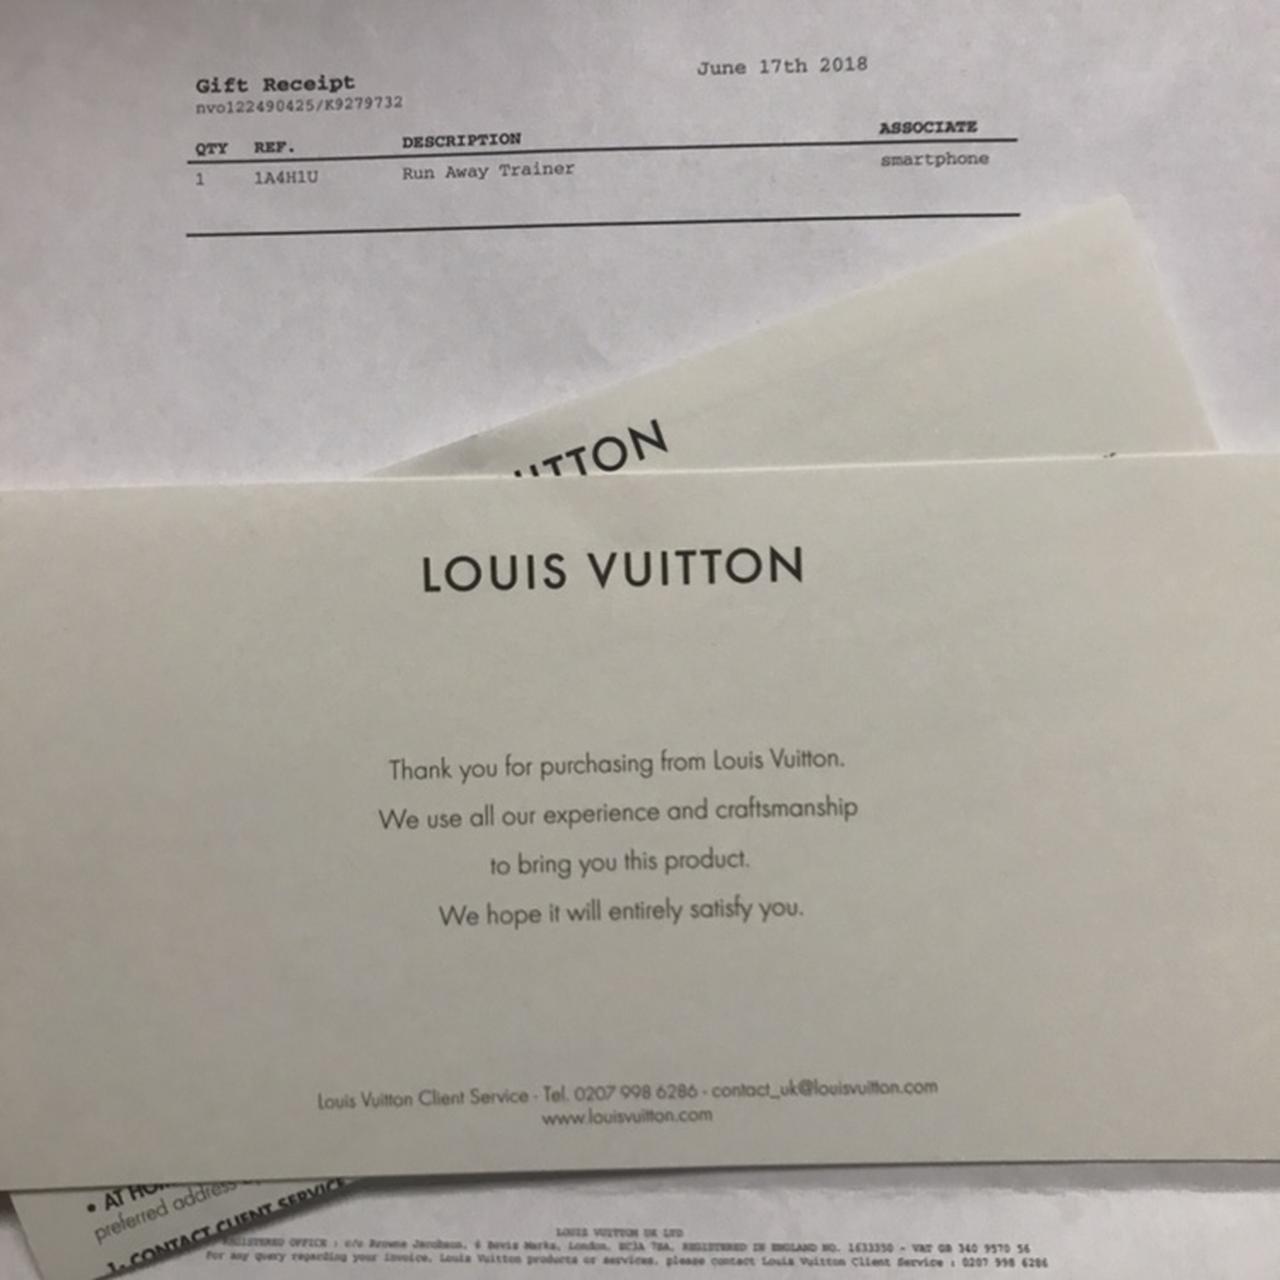 Louis Vuitton Trainer Lv Made Red Hearts SIZE - Depop